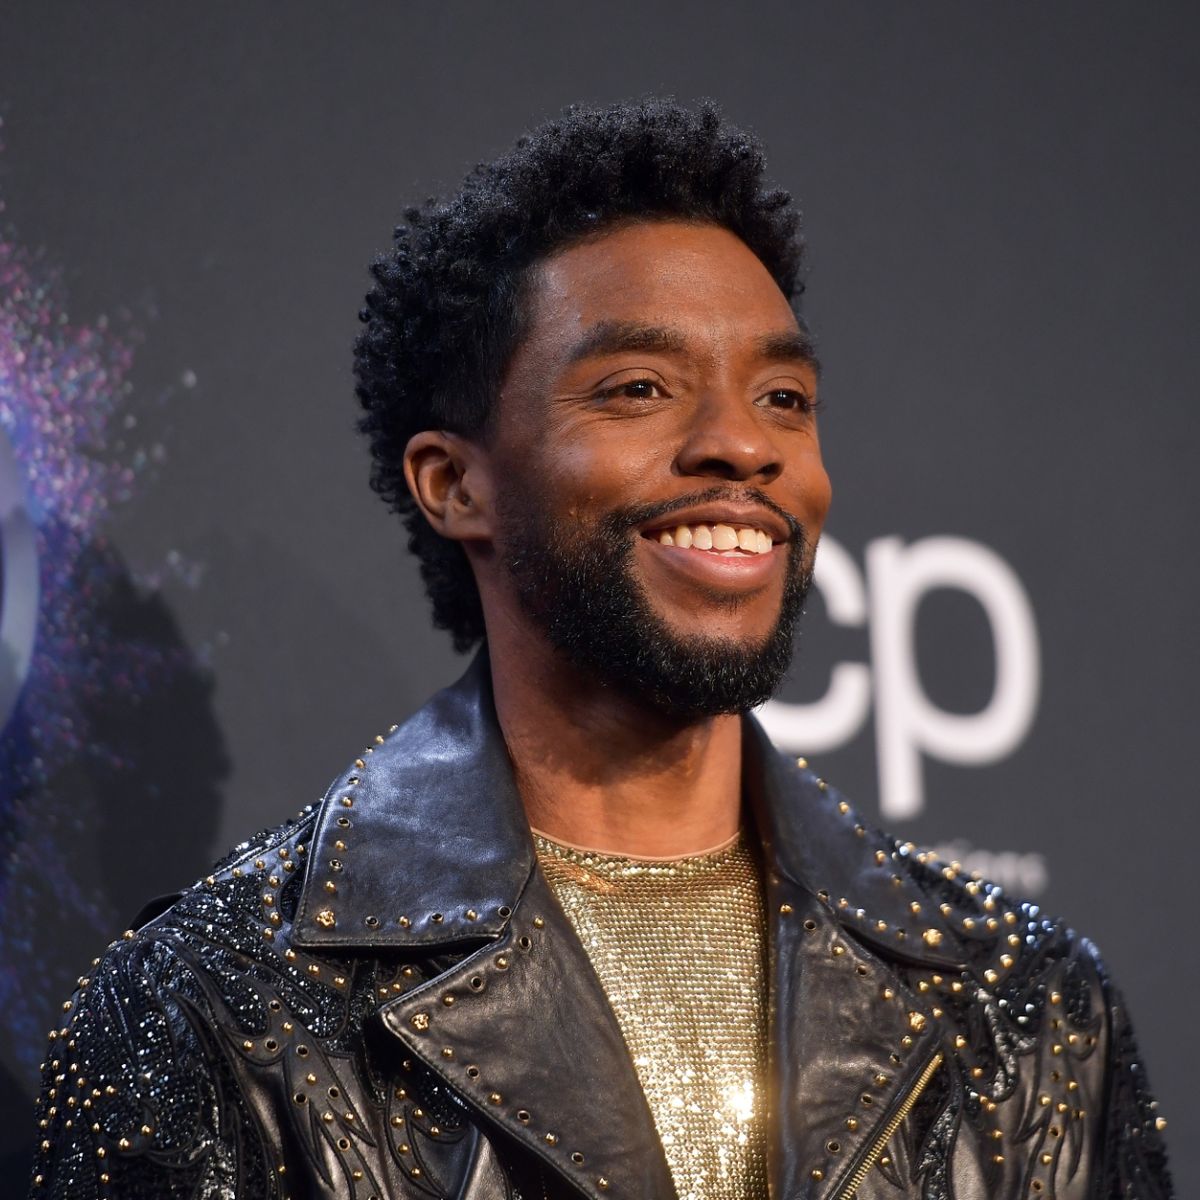 Hollywood Mourns The Death Of Chadwick Boseman